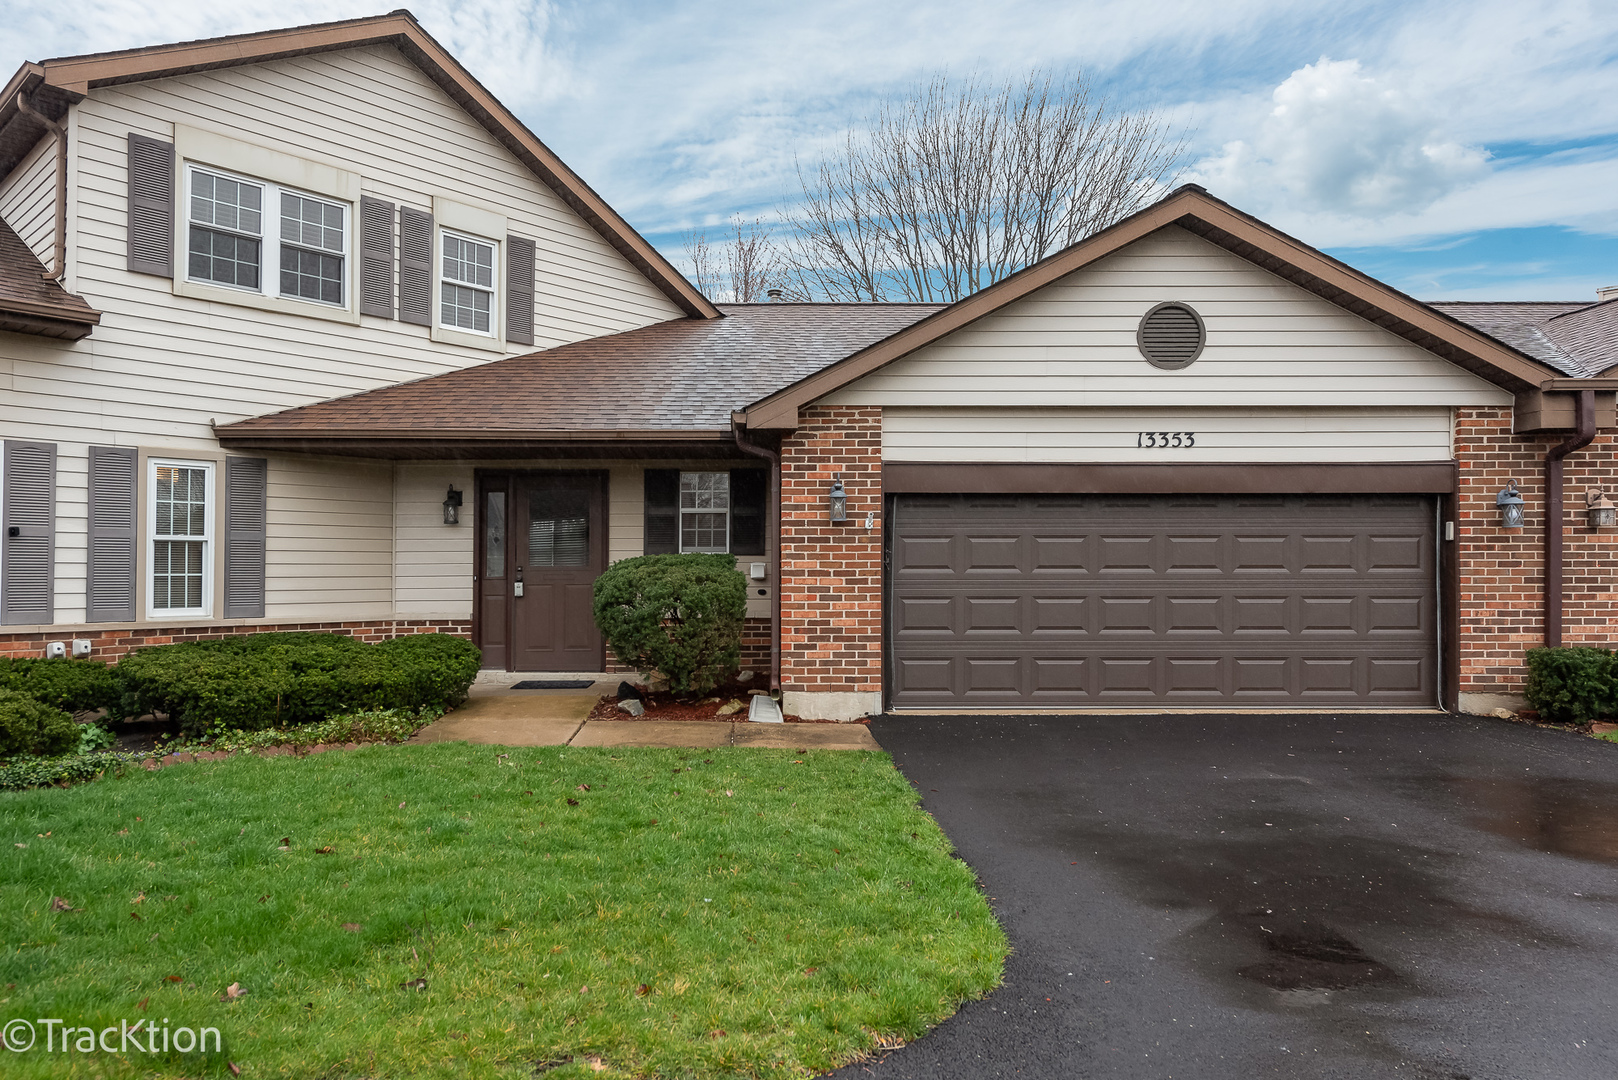 View Plainfield, IL 60544 townhome